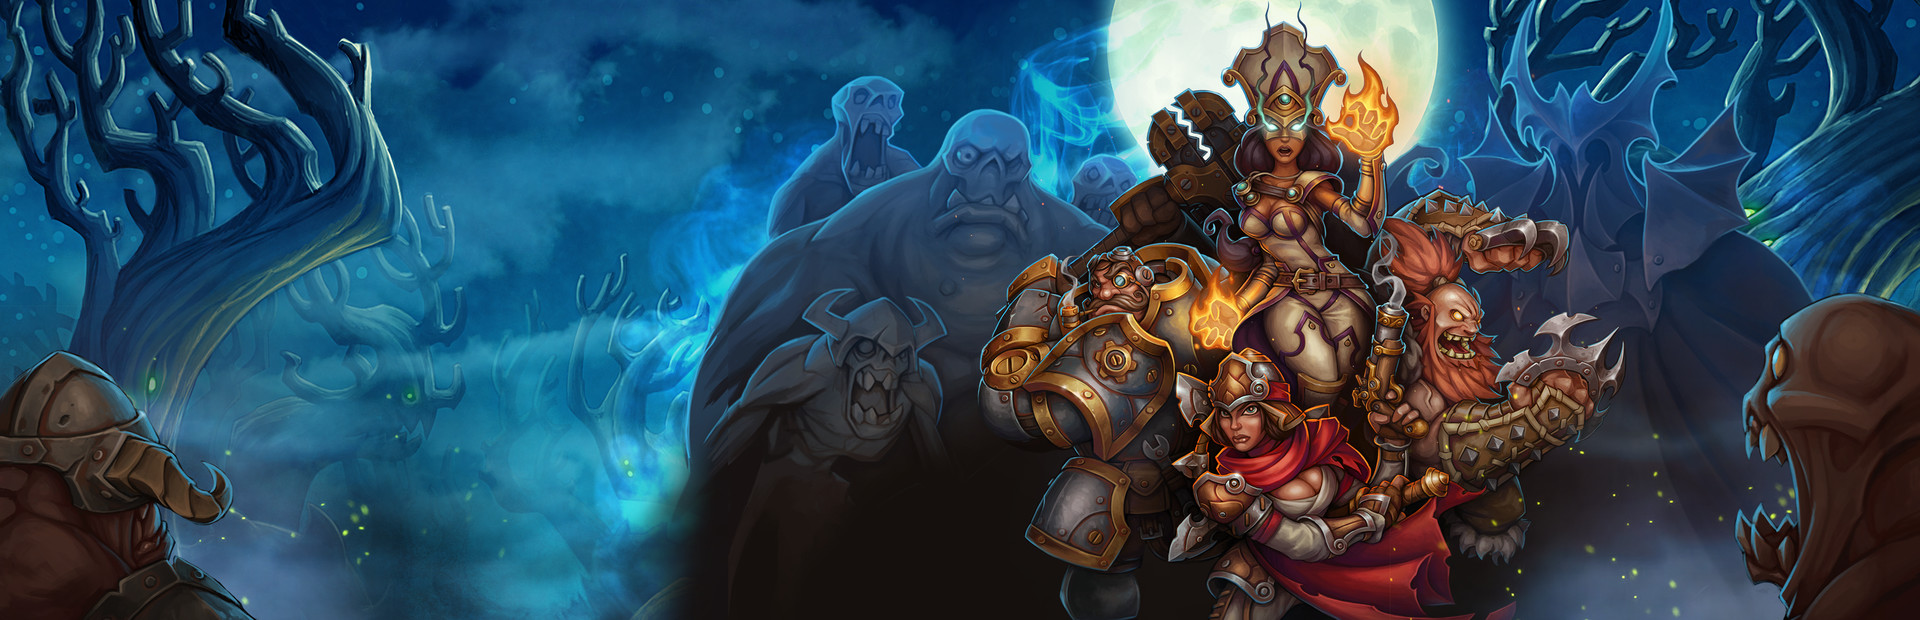 Torchlight II cover image